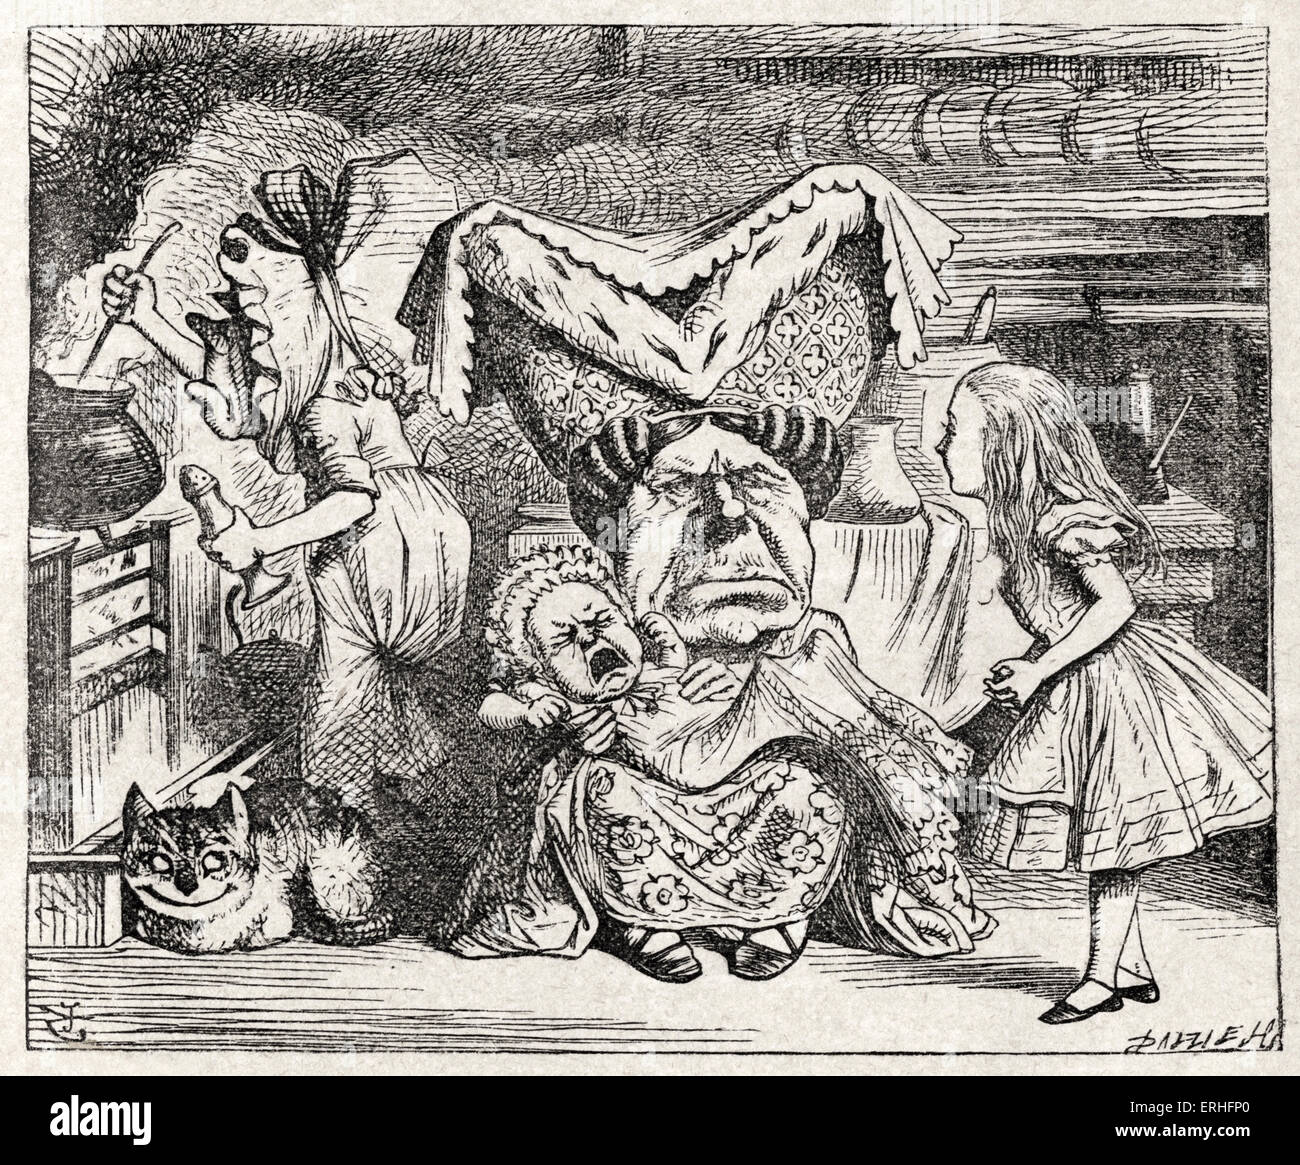 The Duchess Nursing a baby, from Alice in Wonderland by Lewis Carroll (Charles Lutwidge Dodgson), English children's writer and Stock Photo